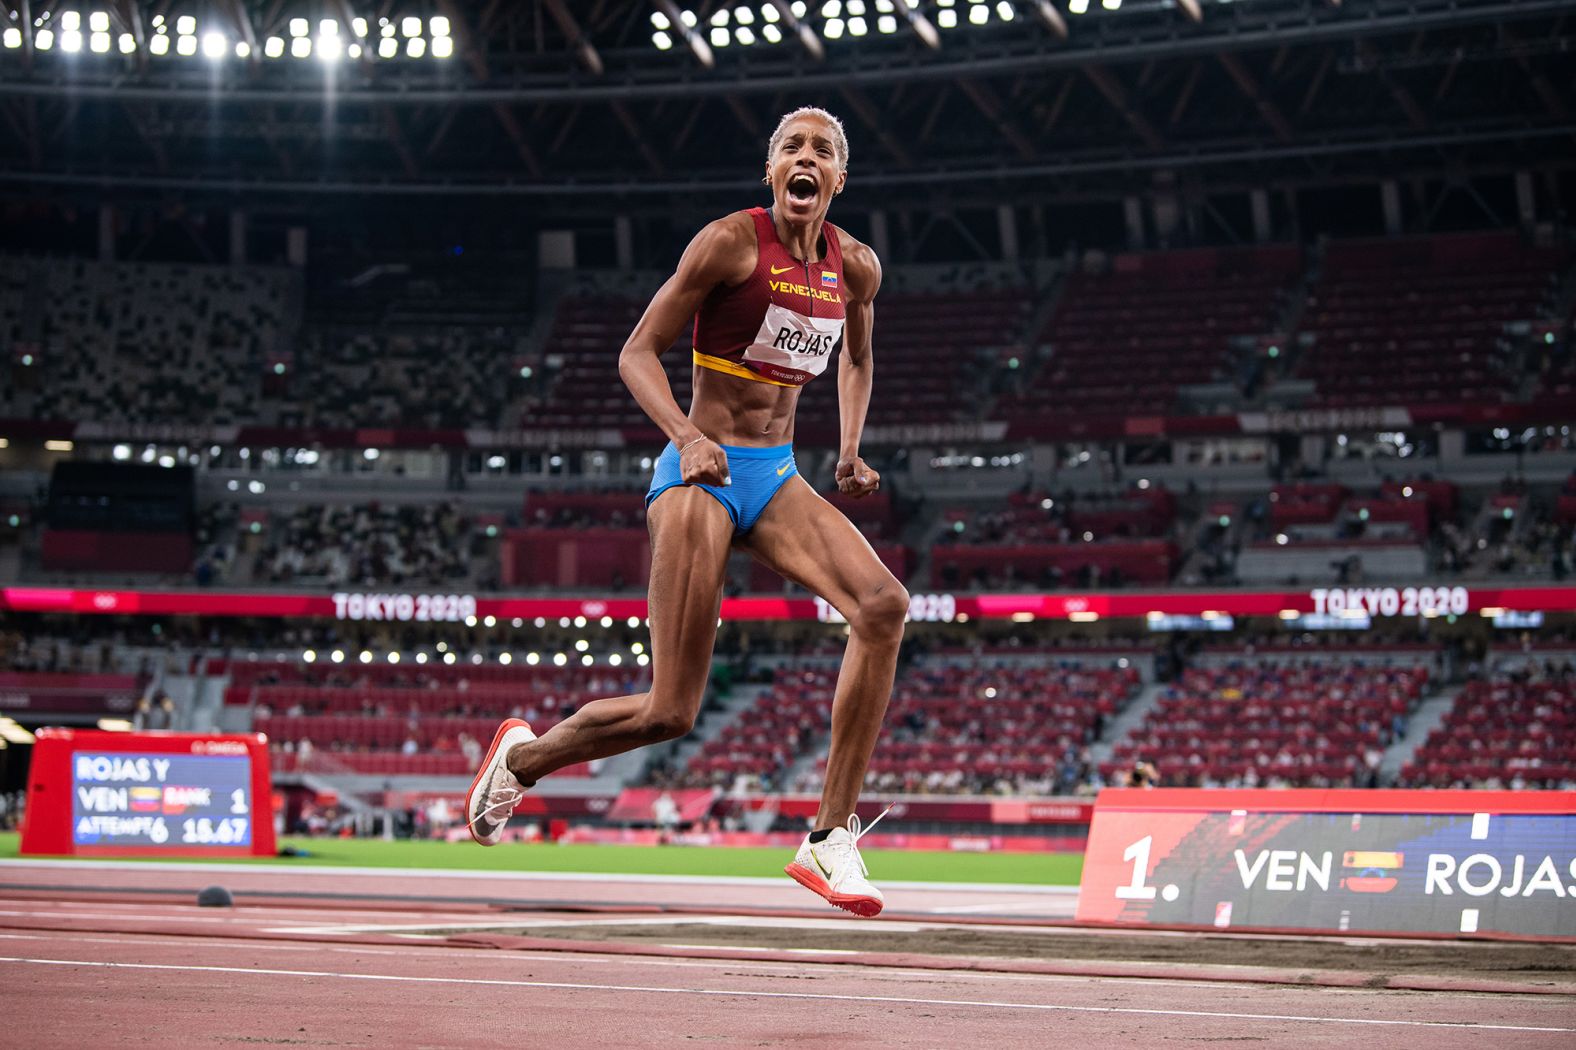 Venezuela's Yulimar Rojas celebrates after <a href="index.php?page=&url=https%3A%2F%2Fwww.cnn.com%2Fworld%2Flive-news%2Ftokyo-2020-olympics-08-01-21-spt%2Fh_2505806e001df14d45588ce165a9747a" target="_blank">setting a new world record in the triple jump</a> on August 1. On her last jump of the night, she jumped 15.67 meters, breaking a record that had stood since 1995. It is Rojas' first Olympic gold medal.